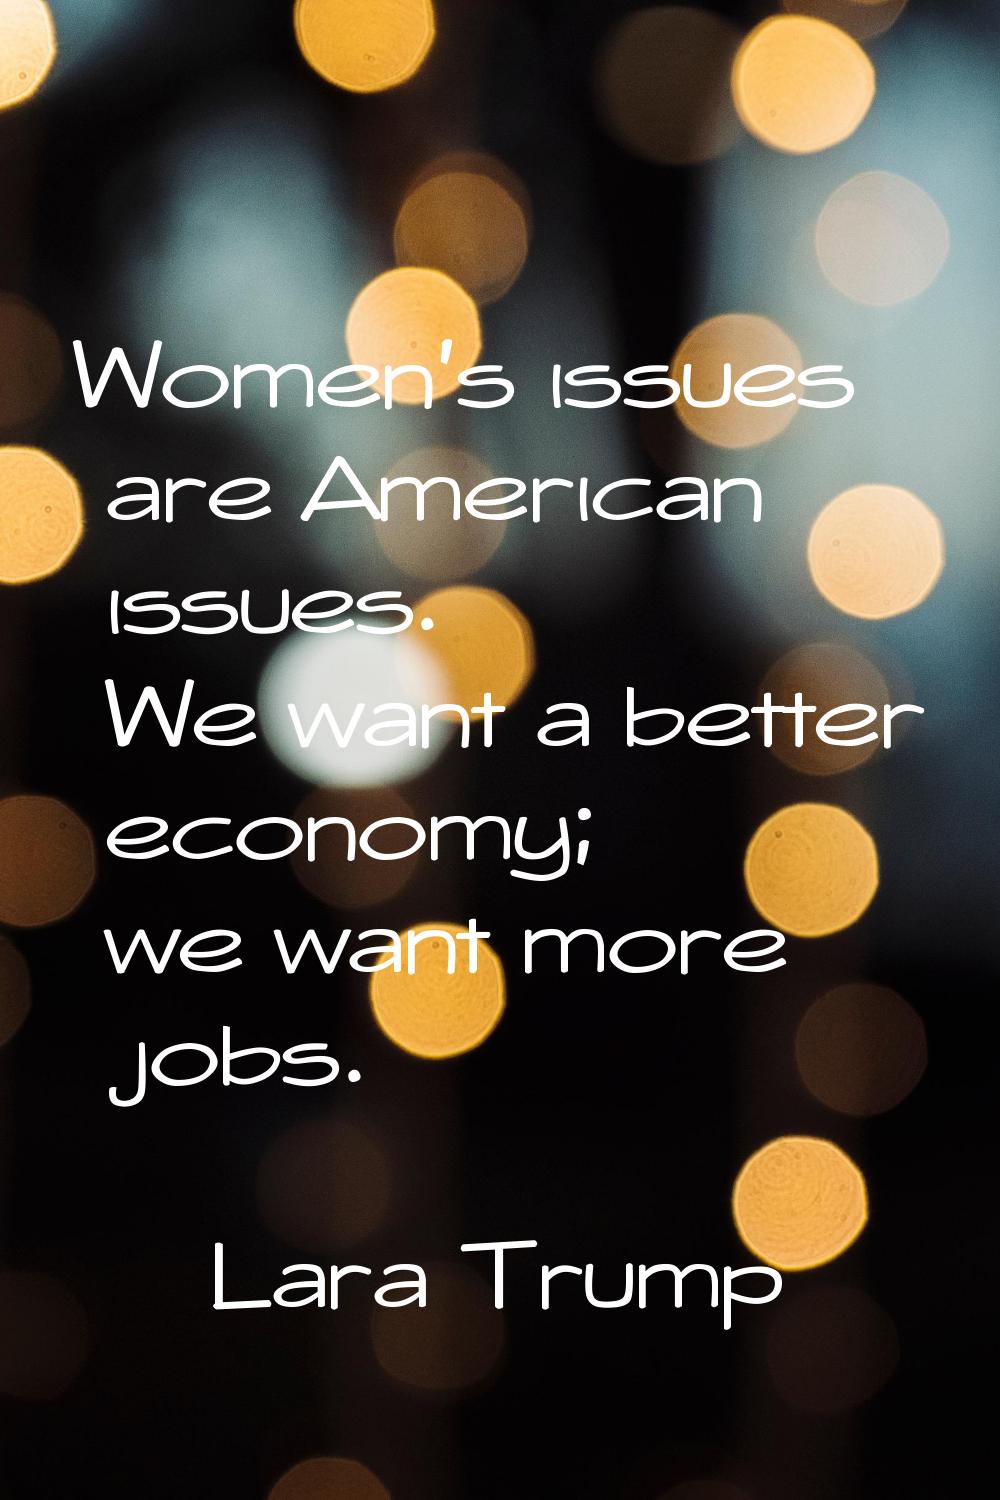 Women's issues are American issues. We want a better economy; we want more jobs.